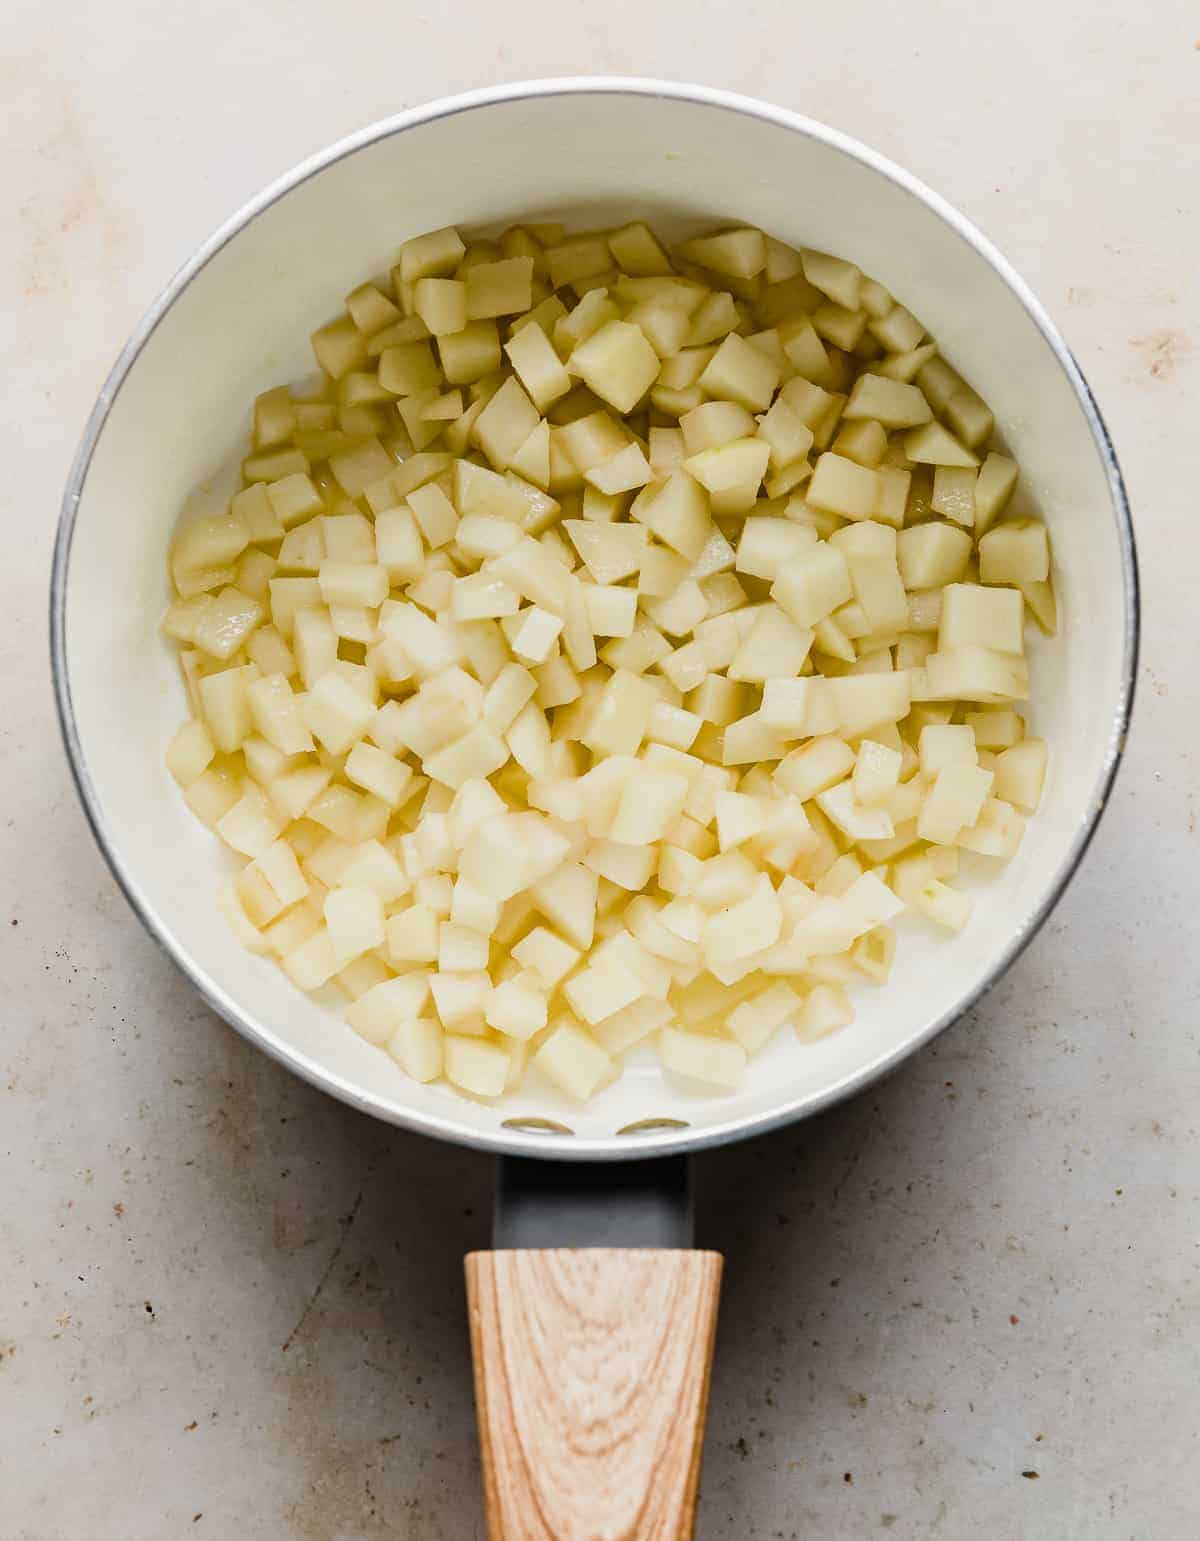 Softened diced apples in a white saucepan.